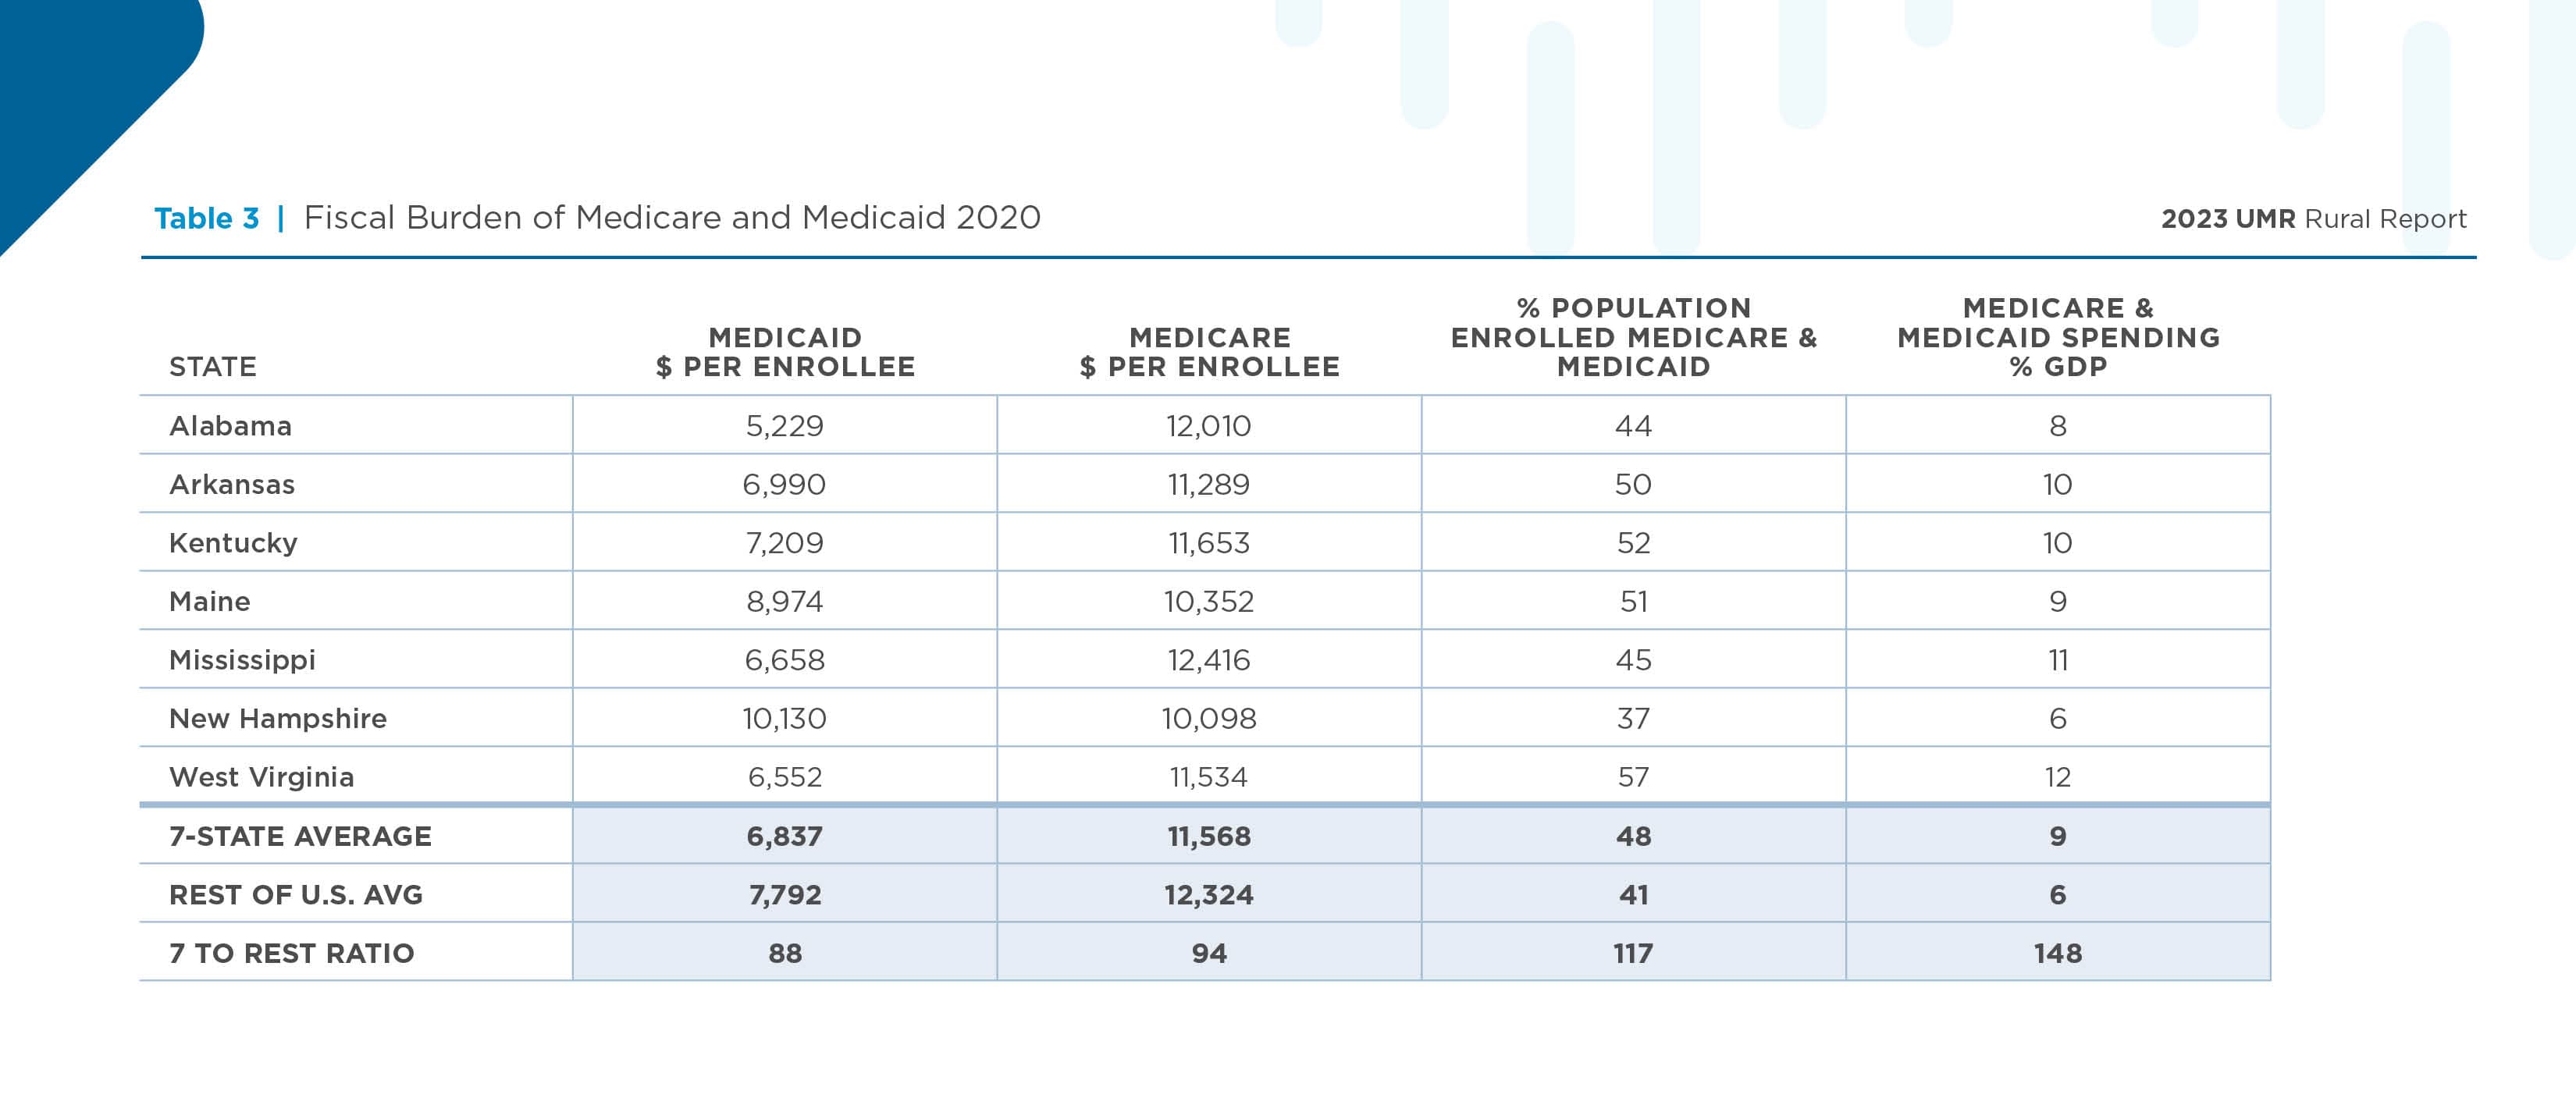 Table 3 | Fiscal Burden of Medicare and Medicaid 2020